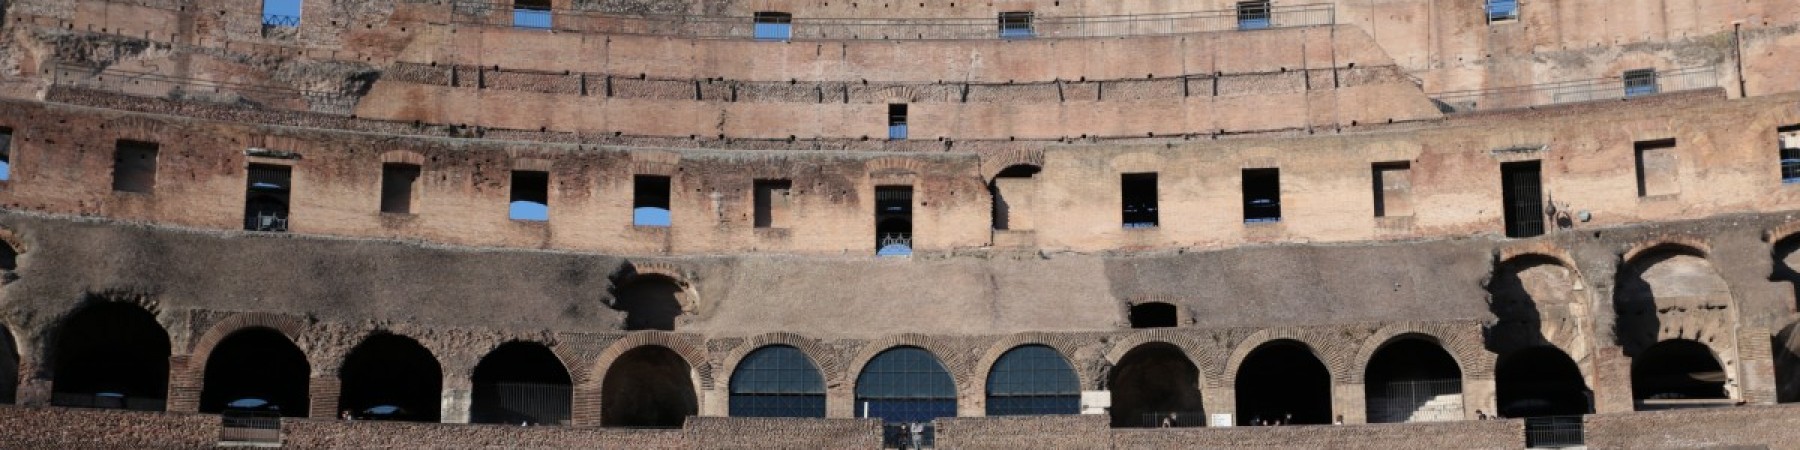 Schools Guided Tour - Colosseum